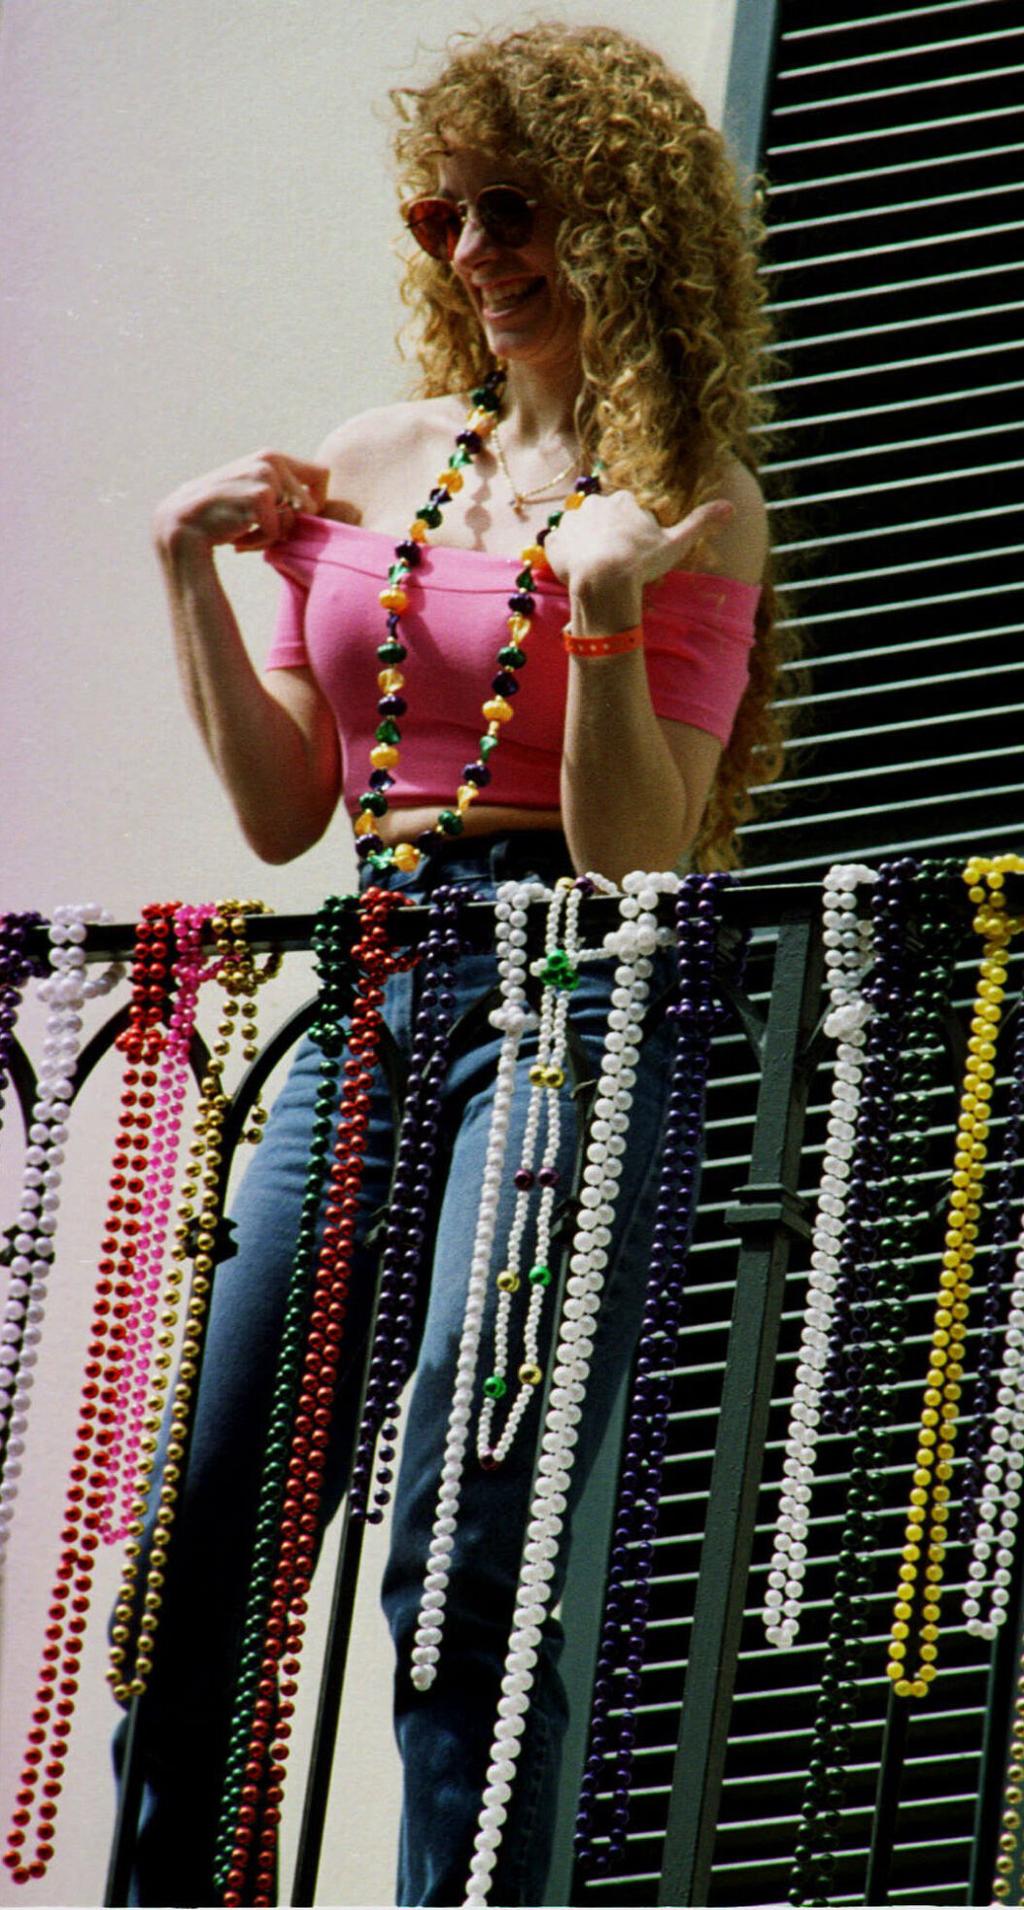 diane current recommends flashing at mardi gras pic